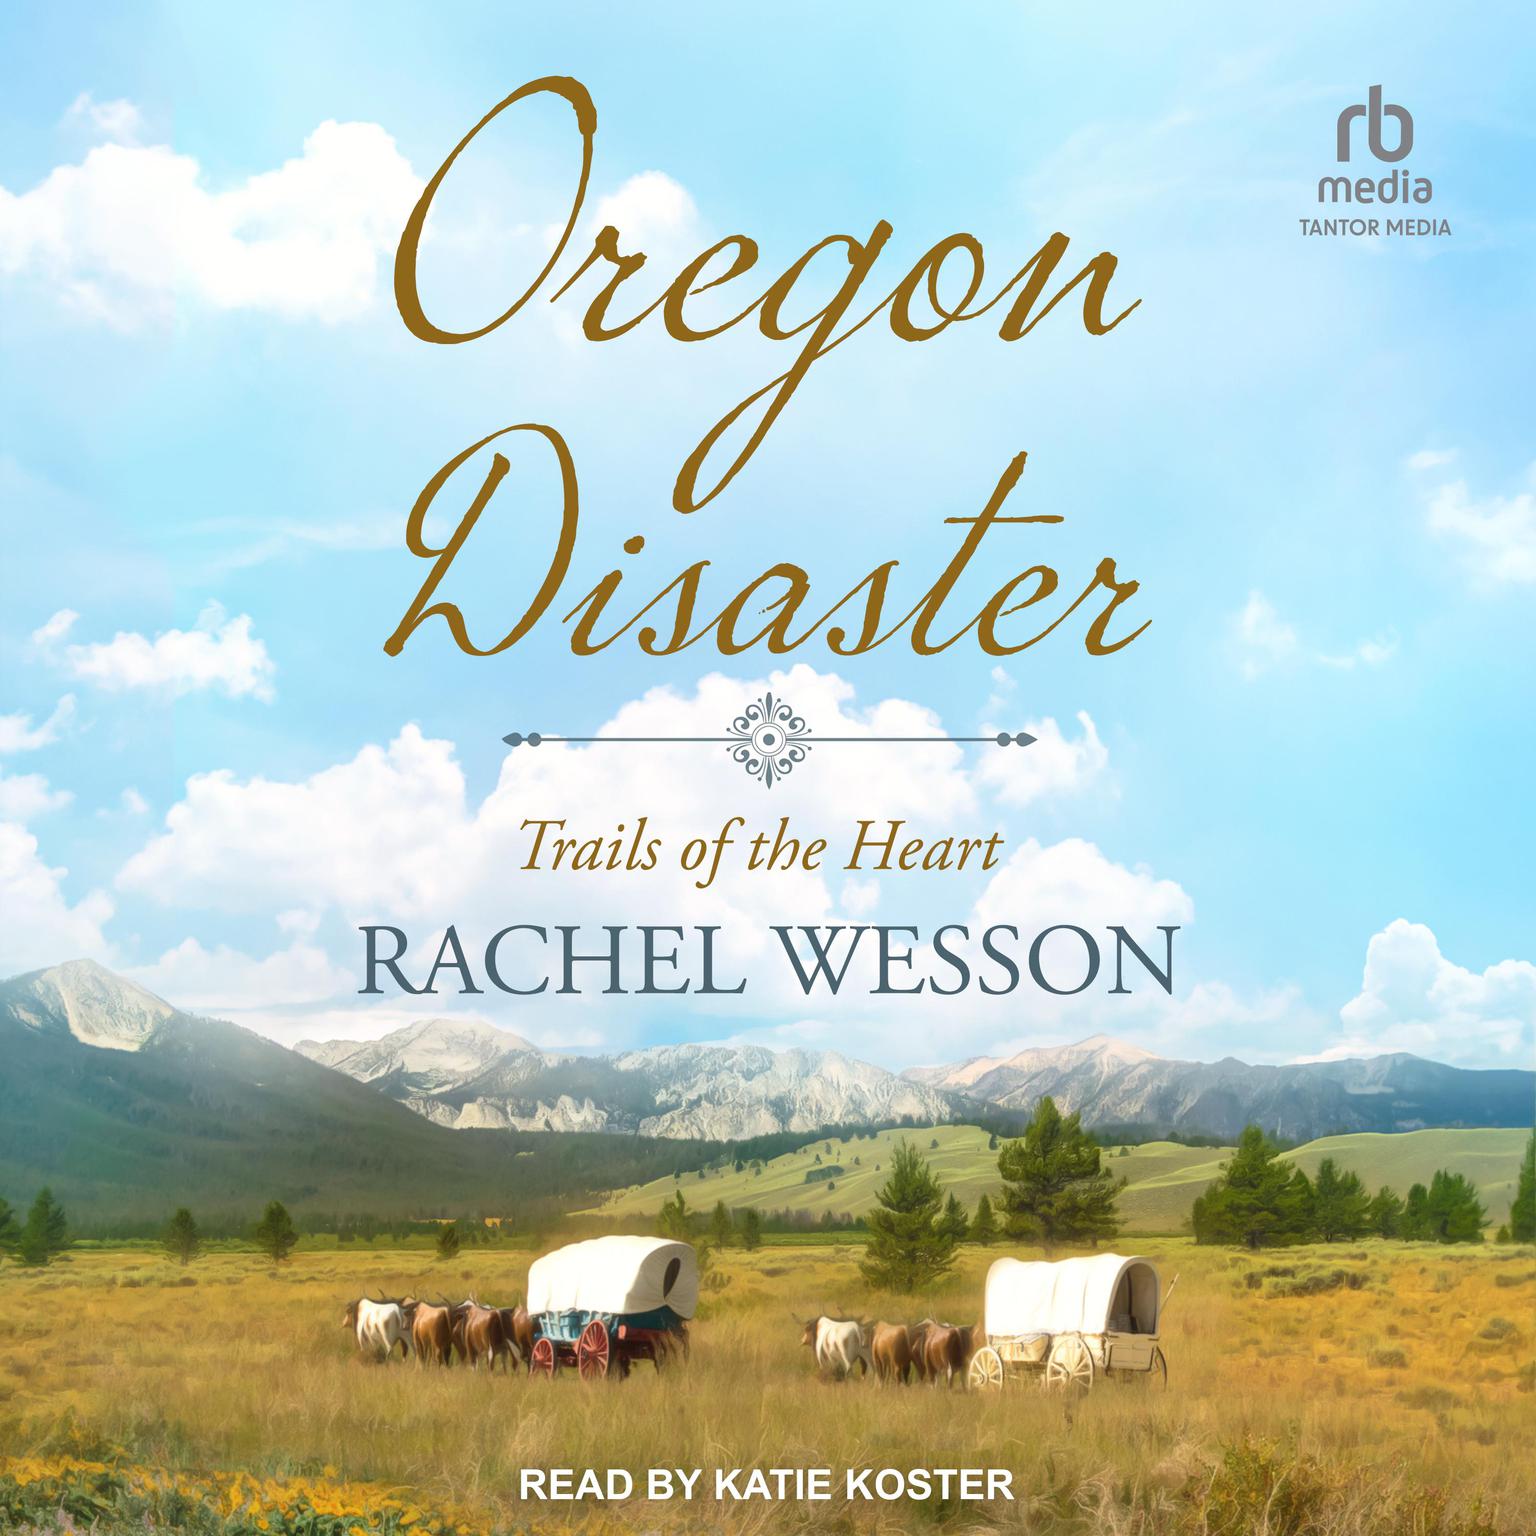 Oregon Disaster Audiobook, by Rachel Wesson